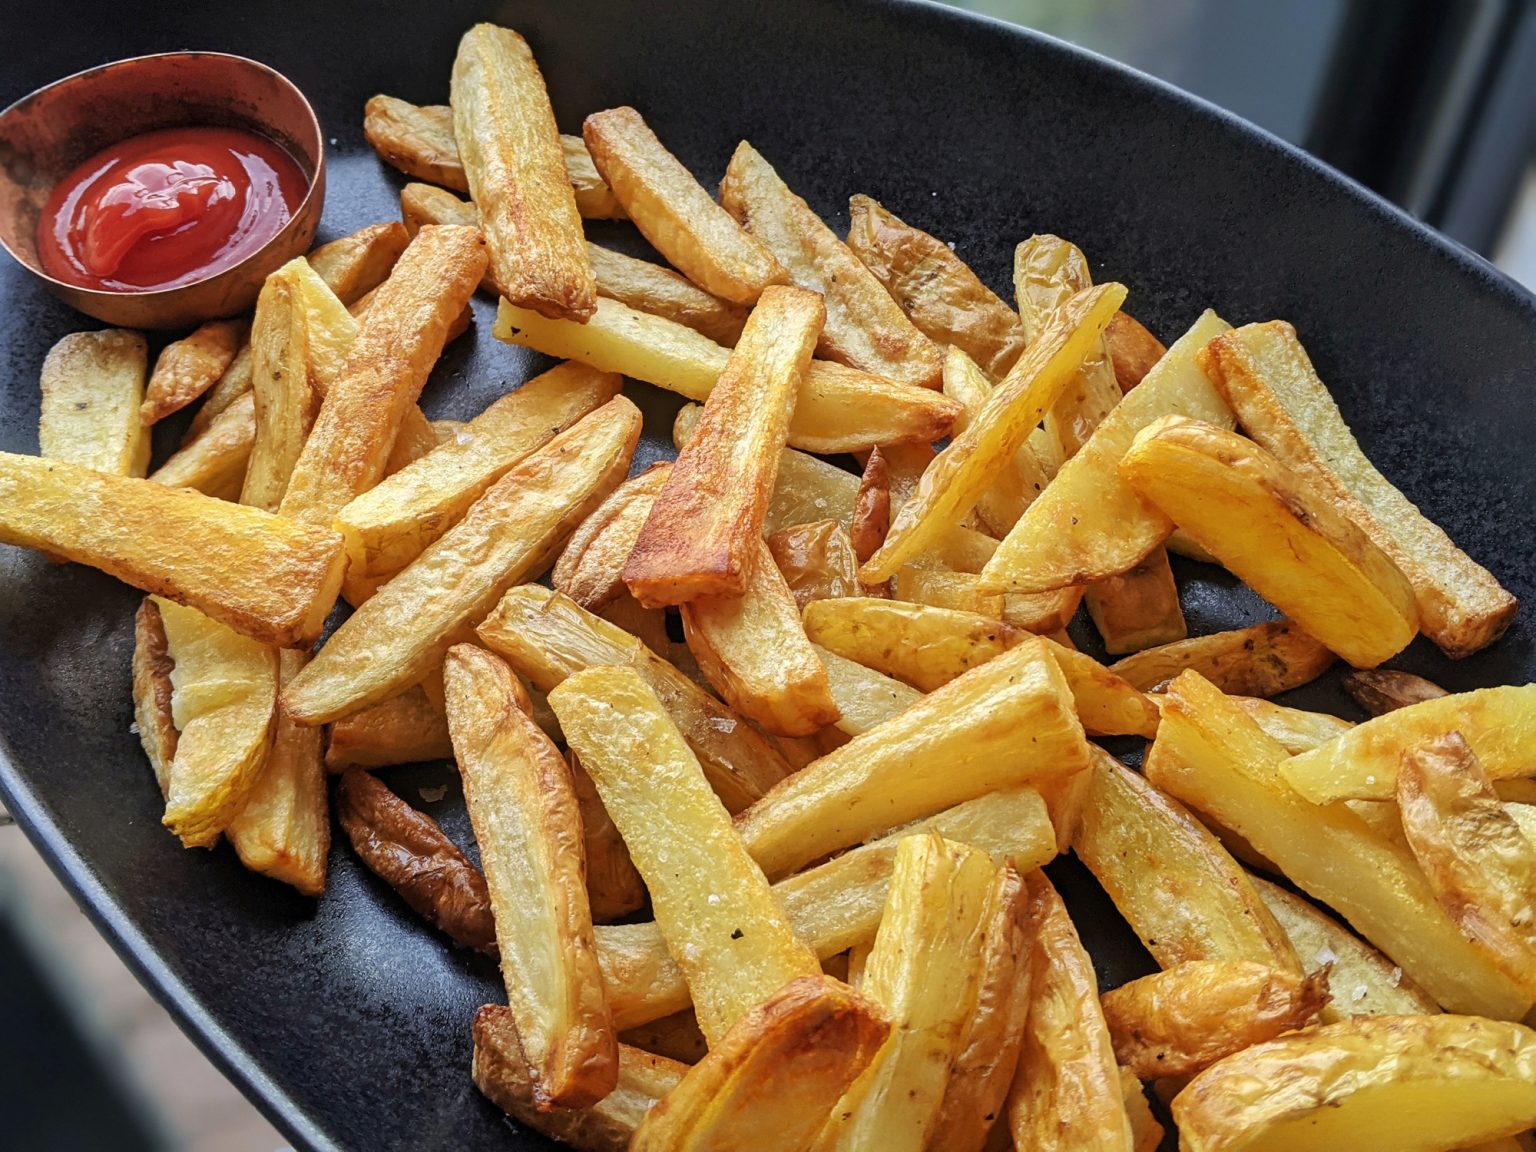 HEALTHY HOMEMADE OVEN CHIPS RECIPE